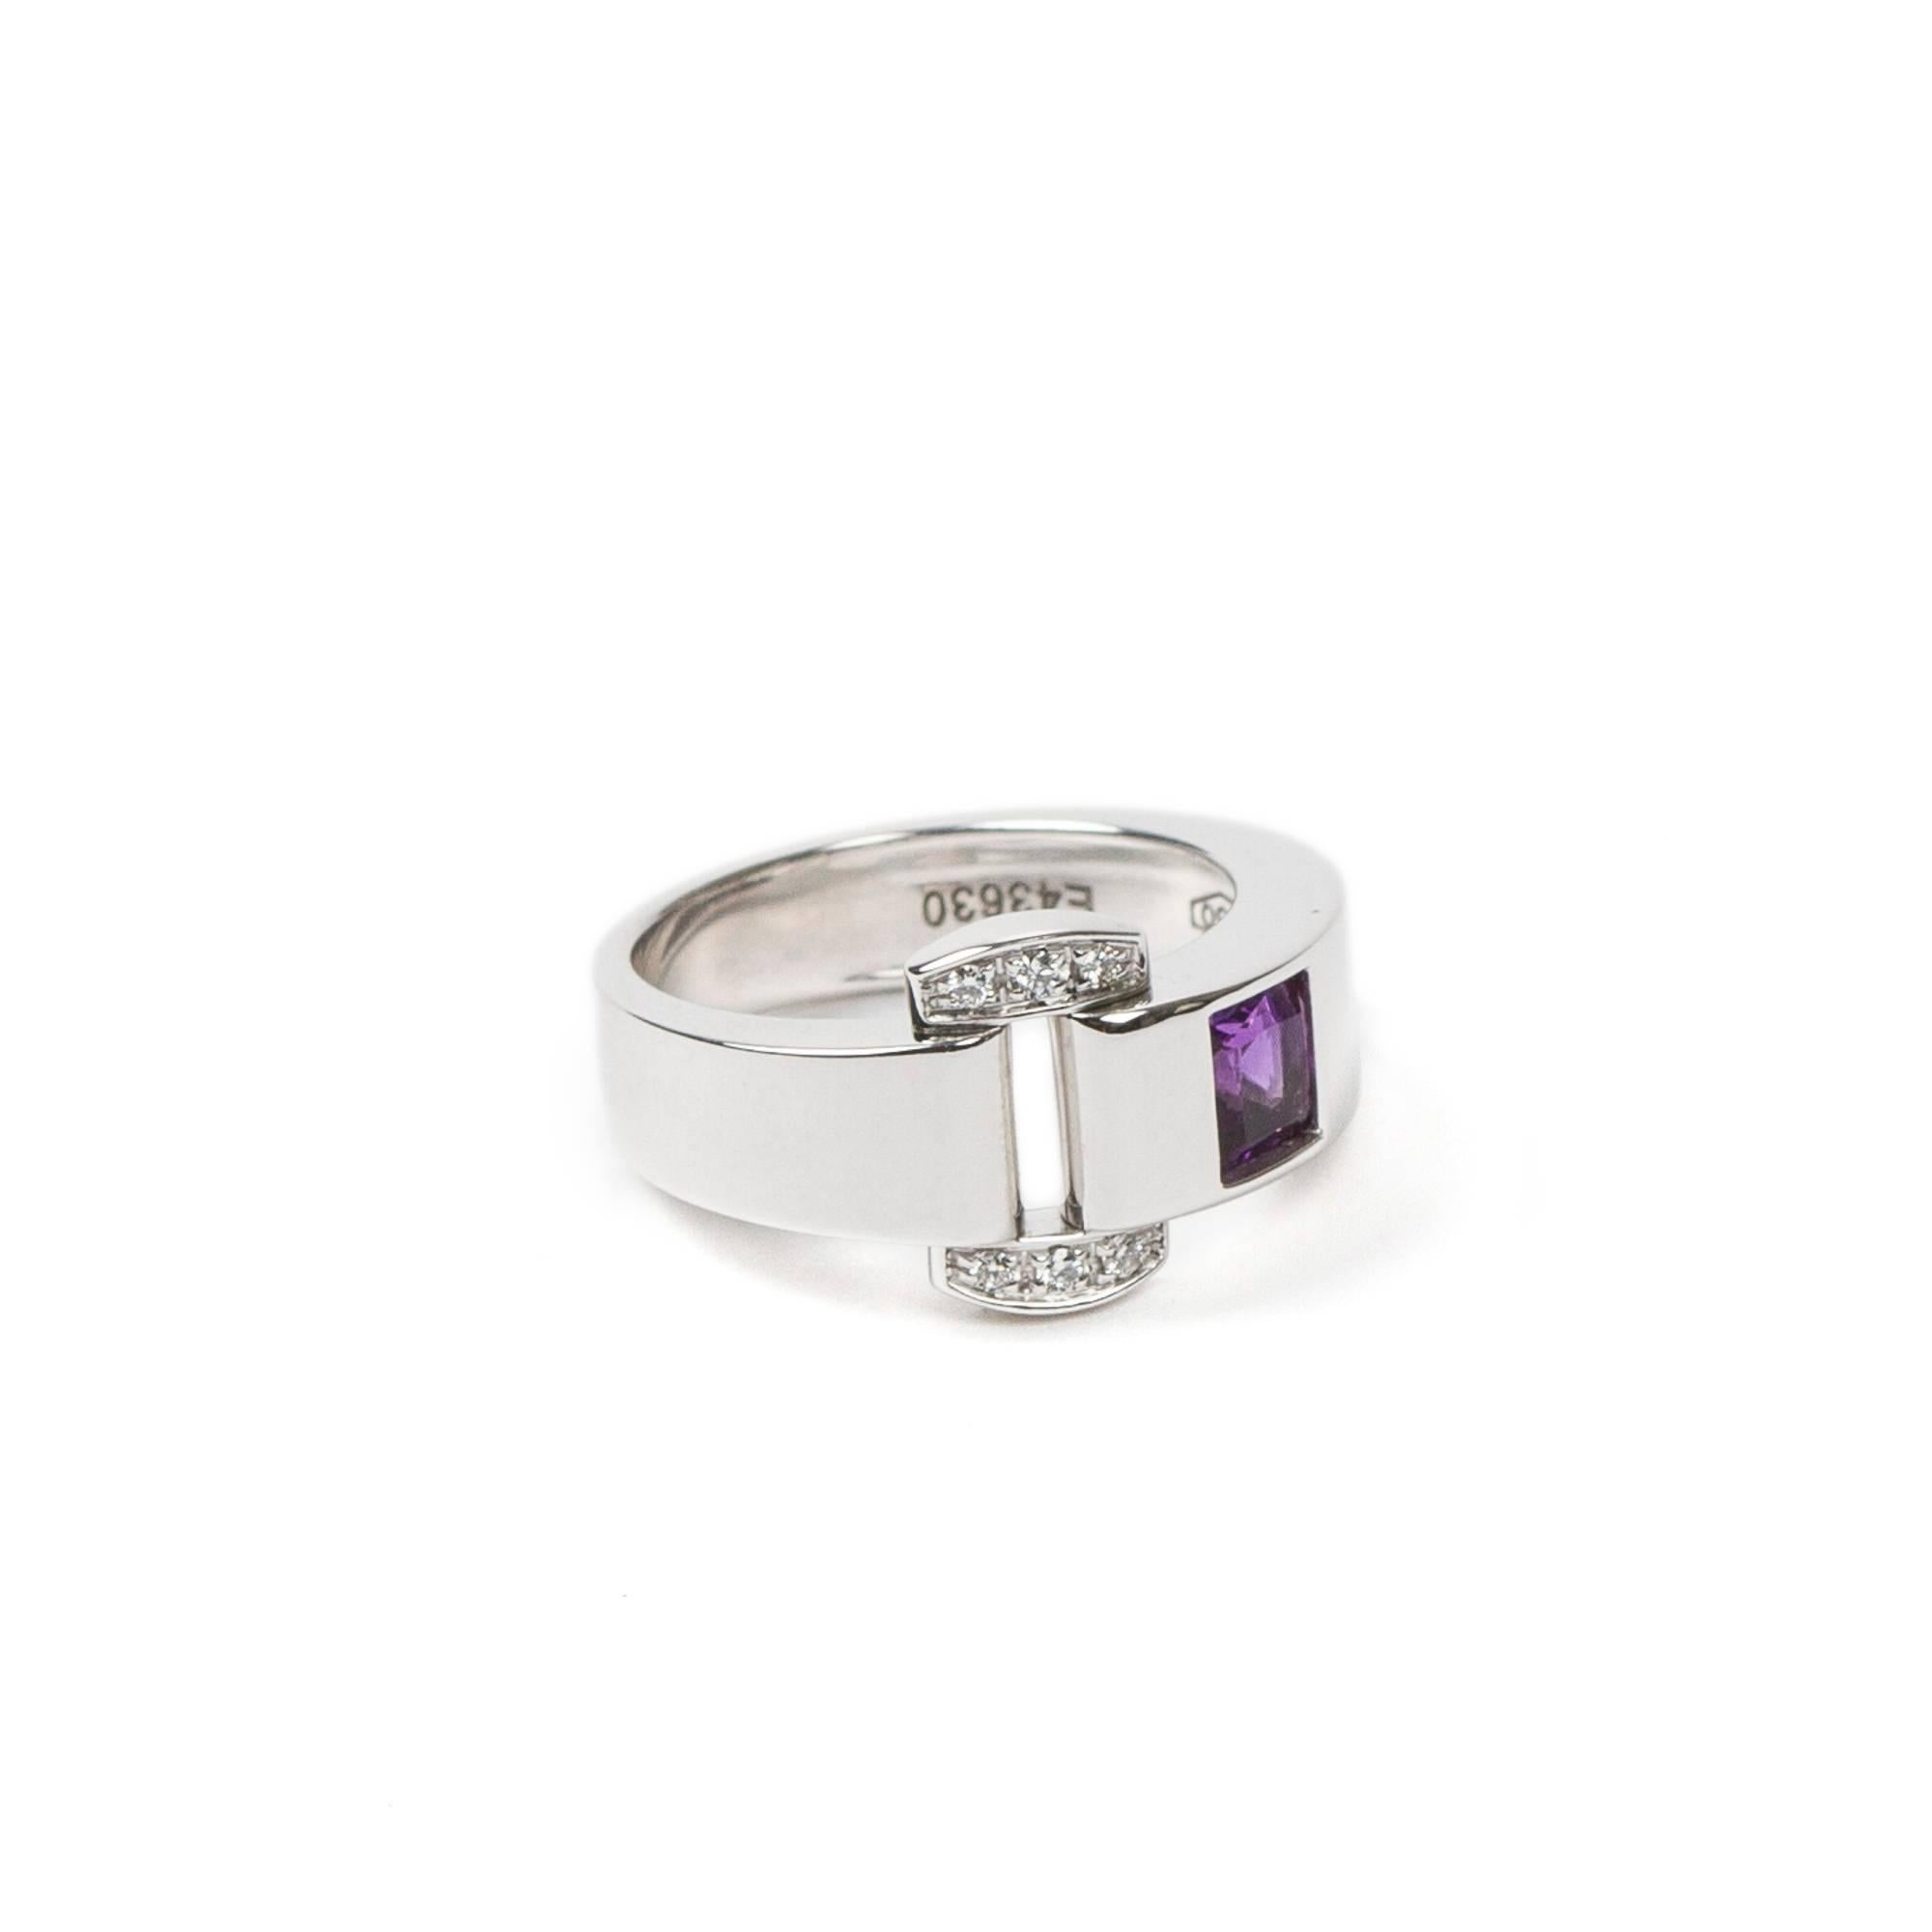 Miss Protocole ring in 750 white gold with princess cut amethyst and paved diamonds. Hallmarks inside of the ring 